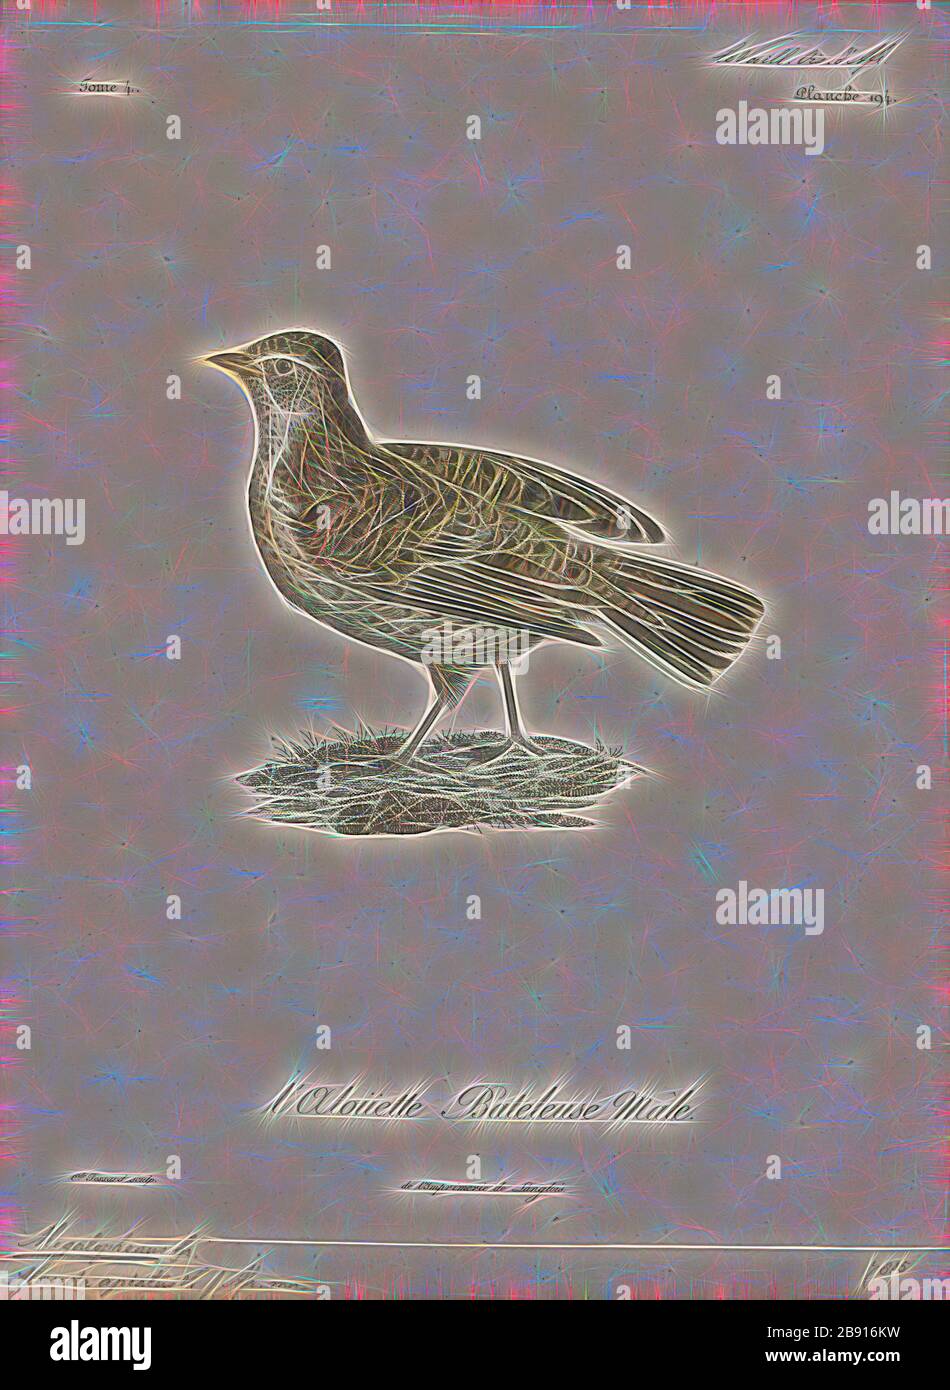 Megalophonus apiatus, Print, Mirafra, Mirafra is a genus of lark in the Alaudidae family. Some Mirafra species are called larks, Reimagined by Gibon, design of warm cheerful glowing of brightness and light rays radiance. Classic art reinvented with a modern twist. Photography inspired by futurism, embracing dynamic energy of modern technology, movement, speed and revolutionize culture. Stock Photo